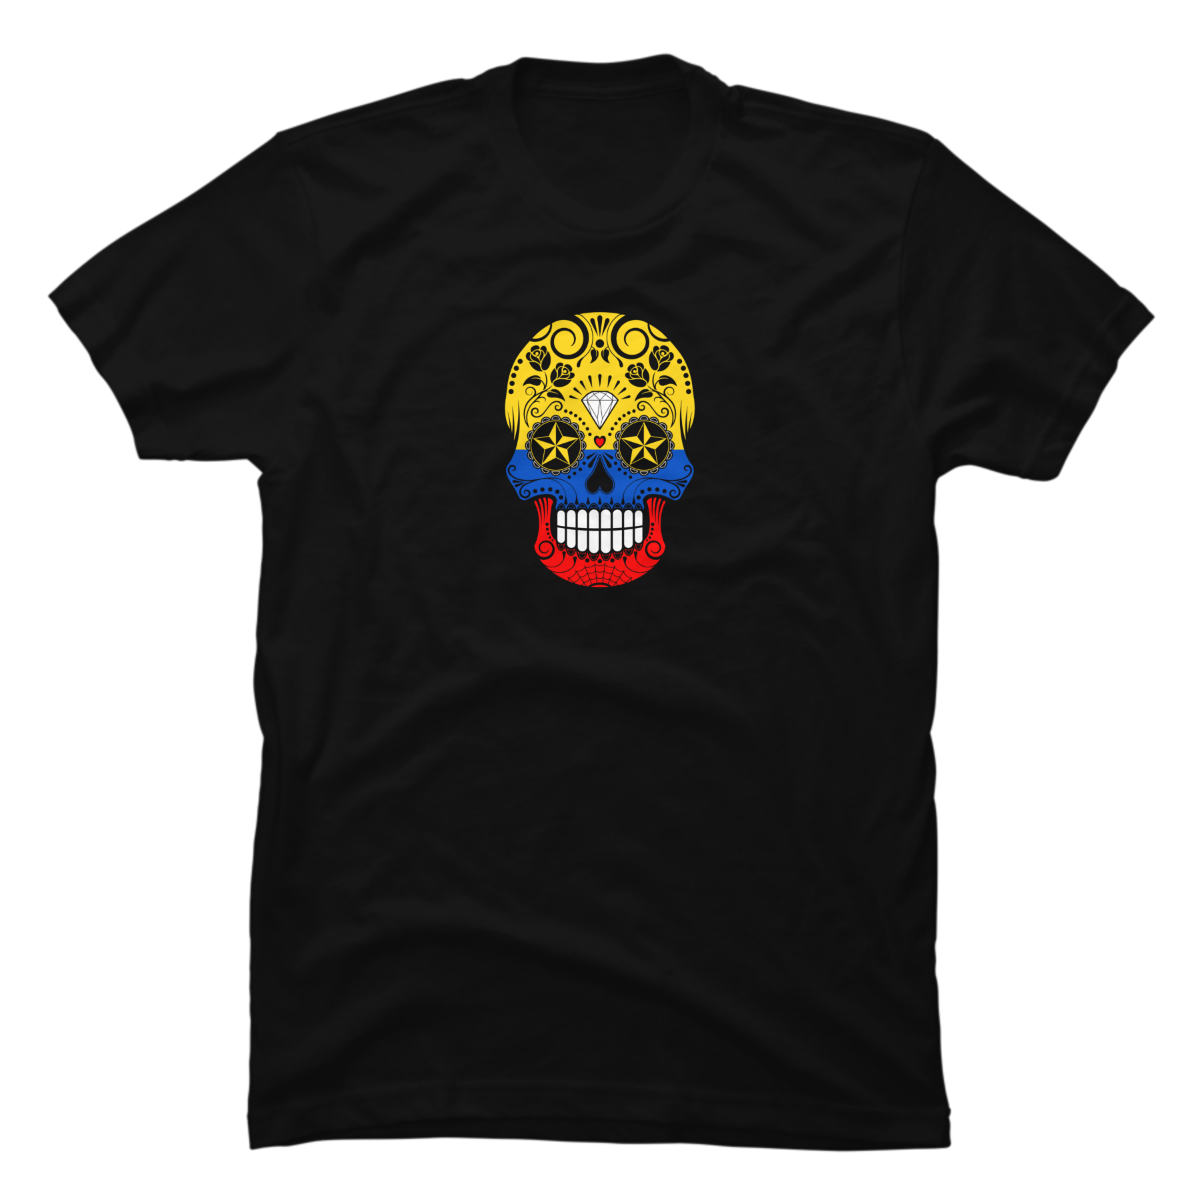 colombian t shirt